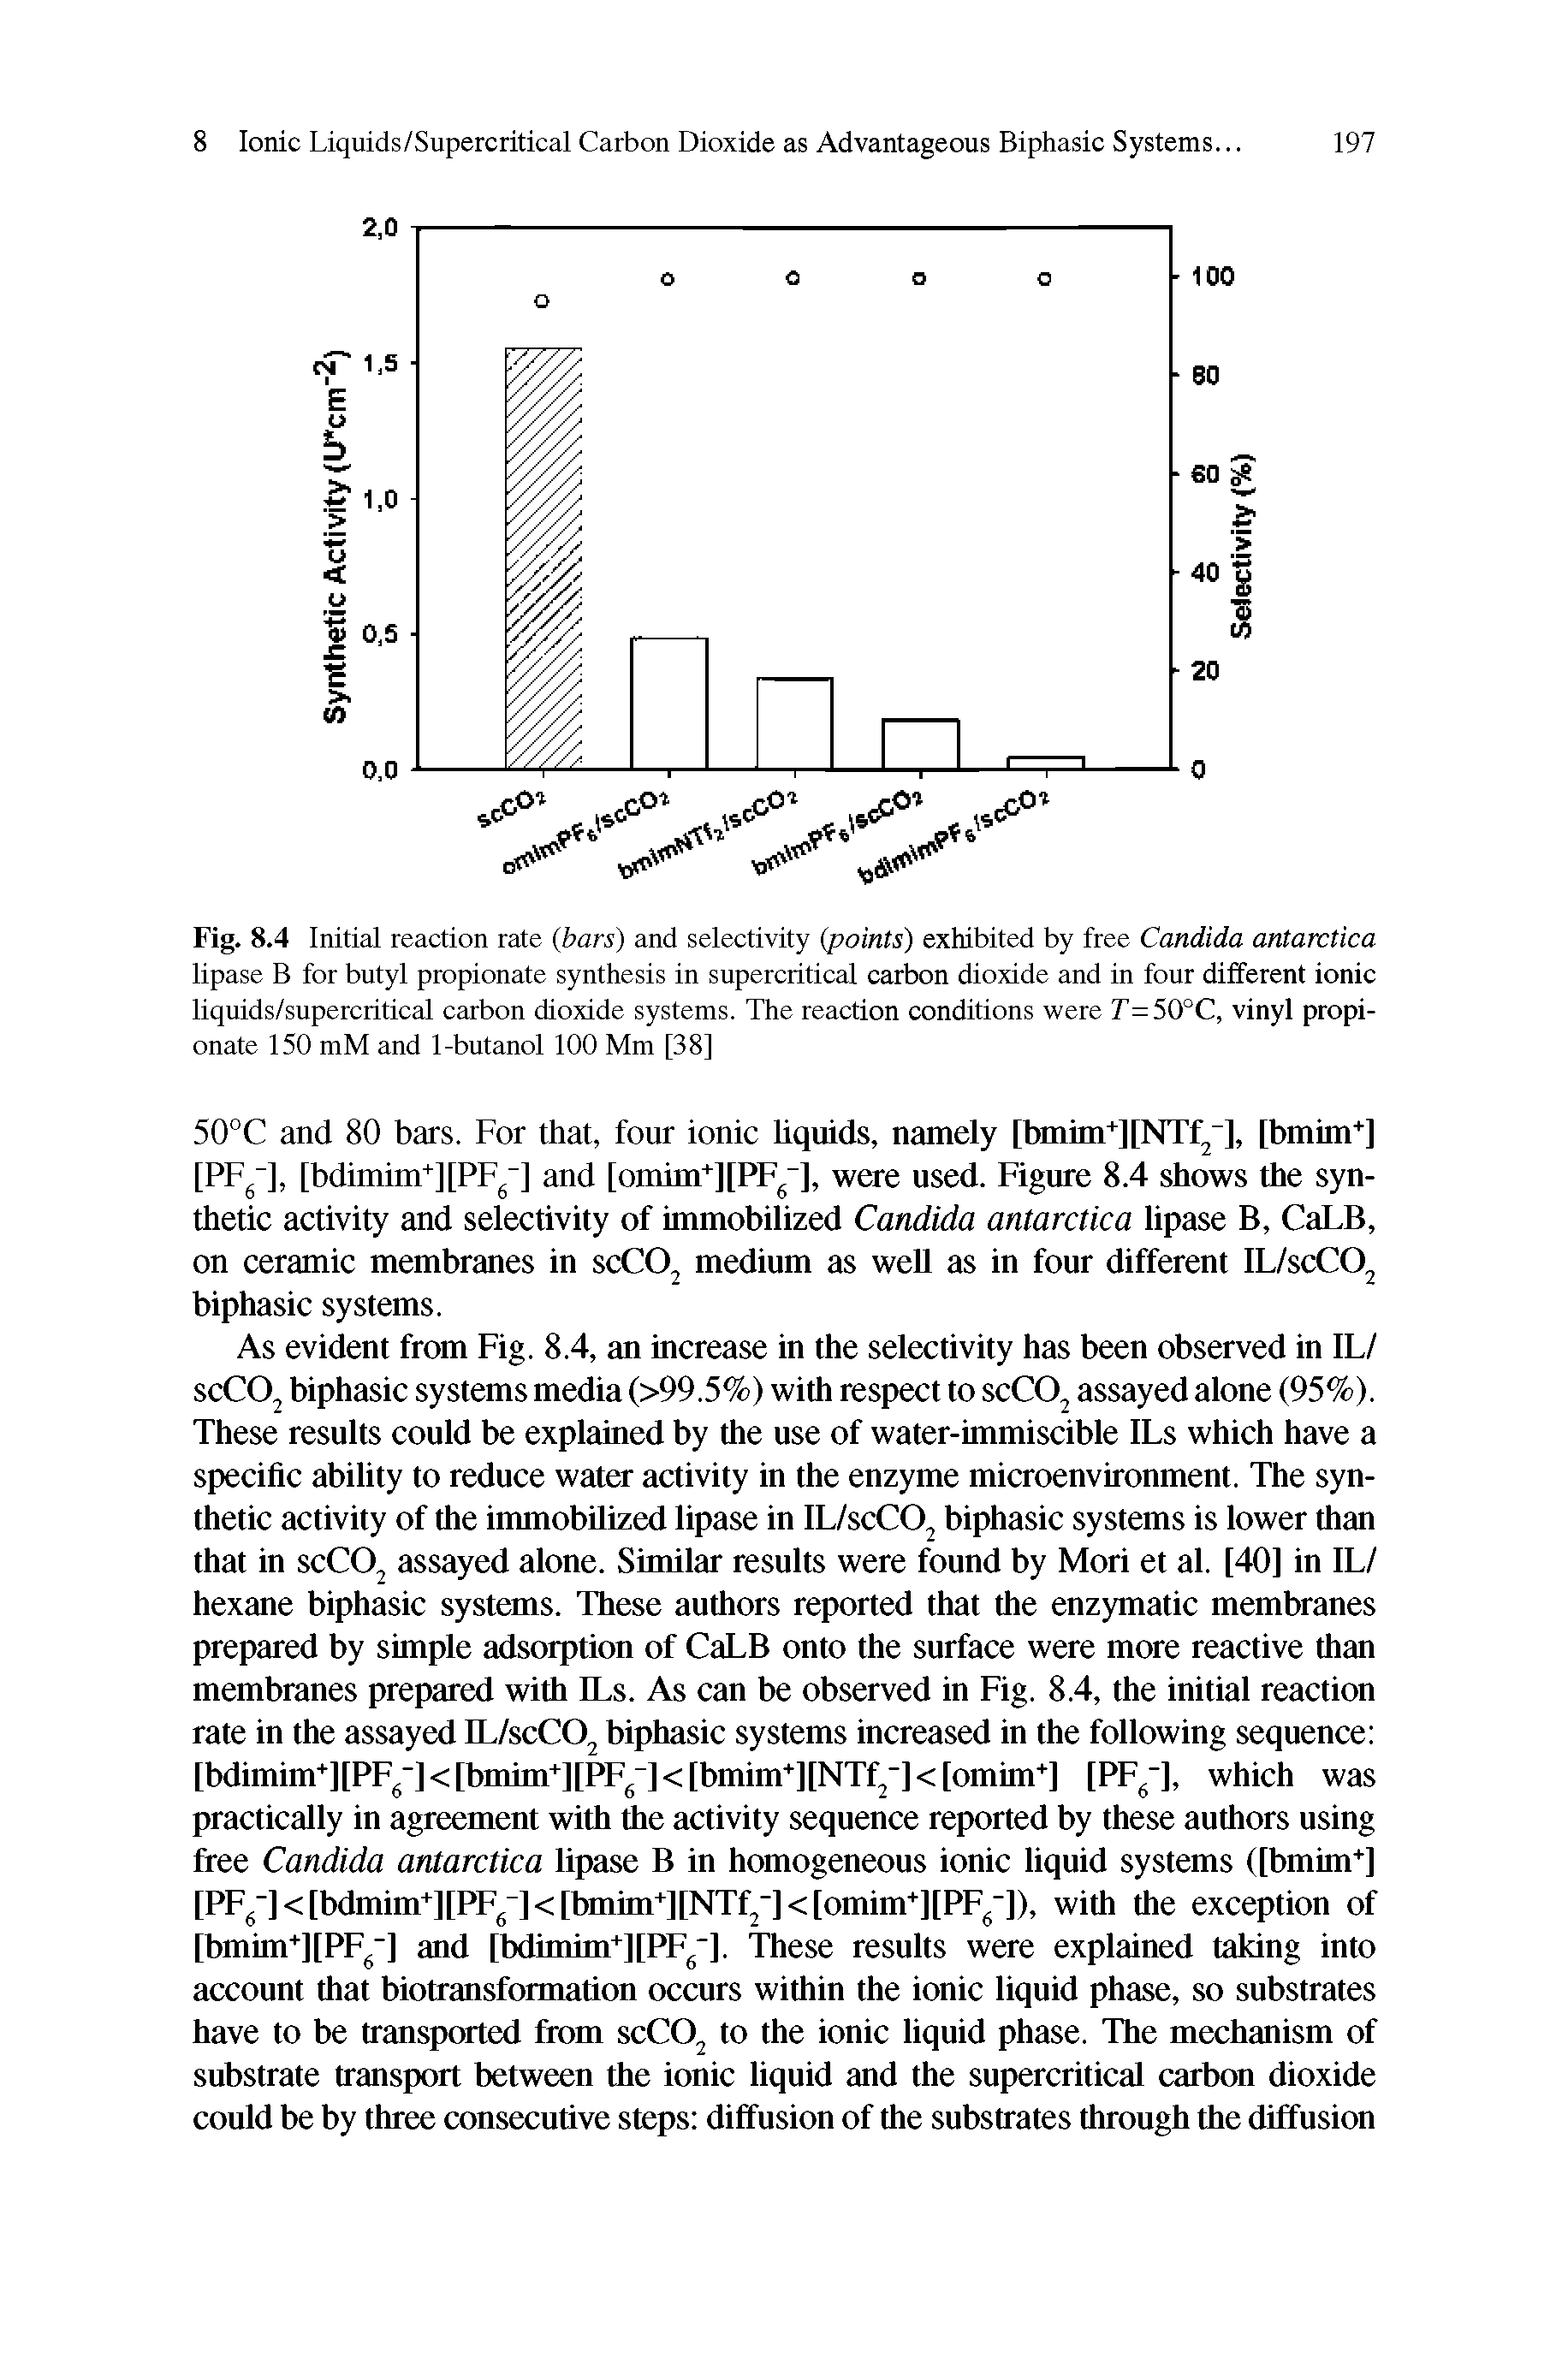 Fig. 8.4 Initial reaction rate (bars) and selectivity (points) exhibited by free Candida antarctica lipase B for butyl propionate synthesis in supercritical carbon dioxide and in four different ionic liquids/supercritical carbon dioxide systems. The reaction conditions were r=50°C, vinyl propionate 150 mM and 1-butanol 100 Mm [38]...